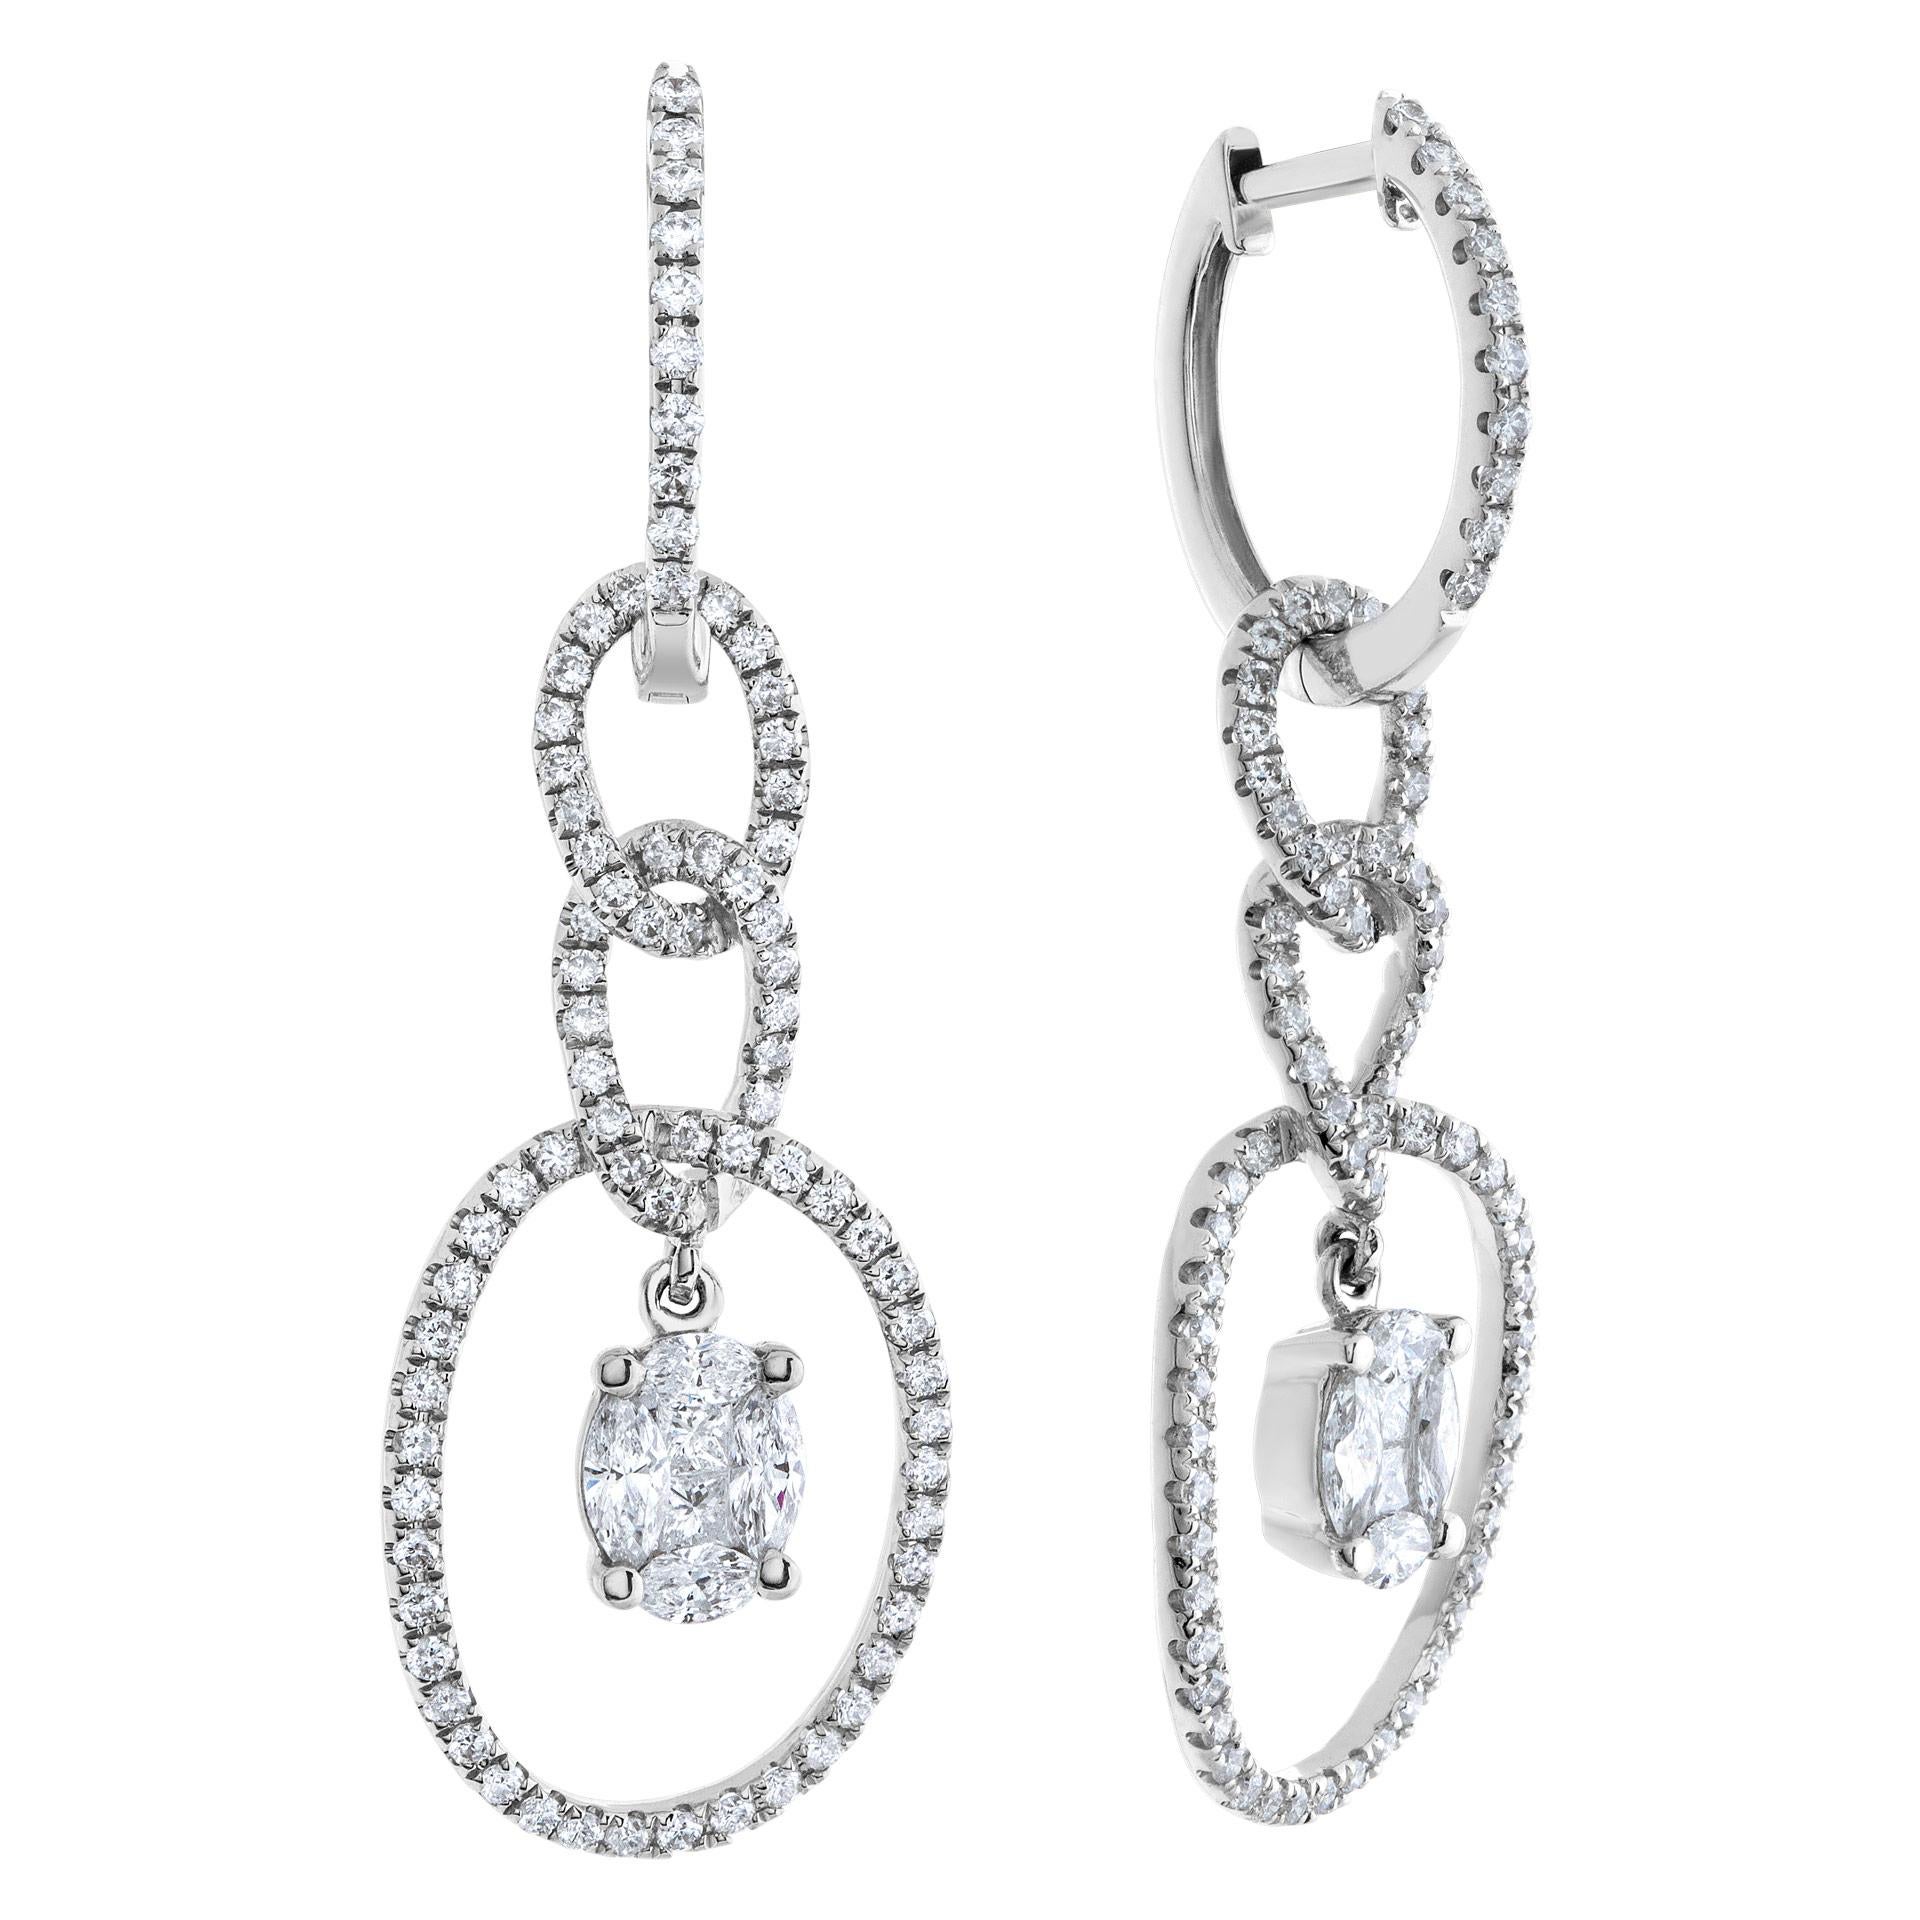 Diamond link drop earring in 18k white gold with 1.51 carats in round cut diamonds and oval cut diamonds. Hanging length: 42mm.
